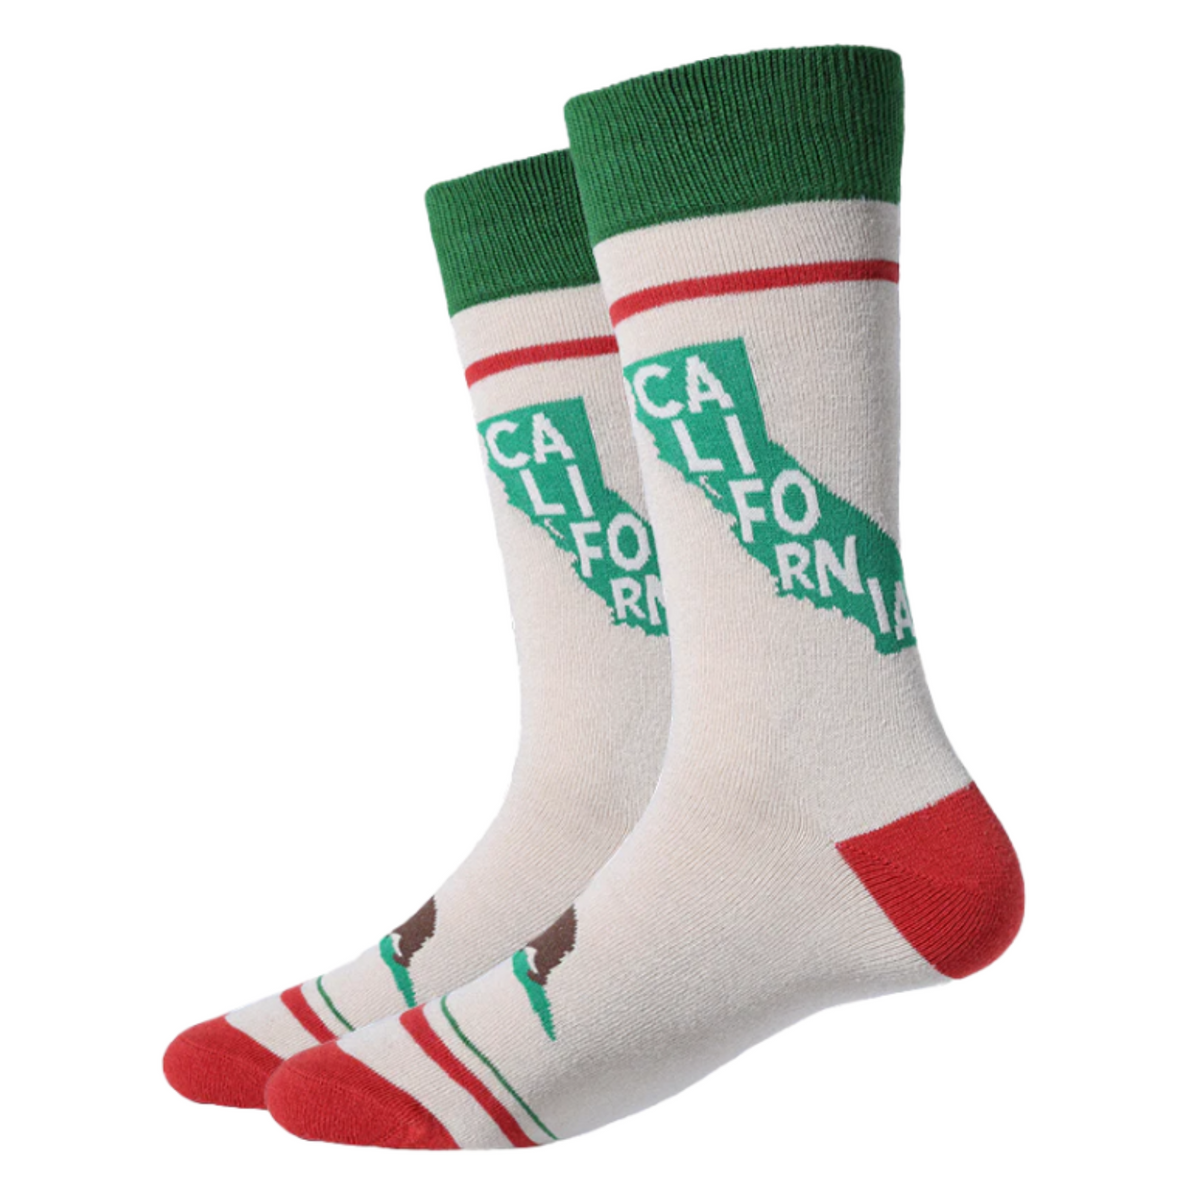 Sock Harbor California Silhouette men&#39;s crew sock featuring beige sock with green cuff and red toes with green silhouette of California and the letters &quot;California&quot; inside the silhouette. The Bear from the California state flat is on the top of the foot. Sock shown on display feet. 